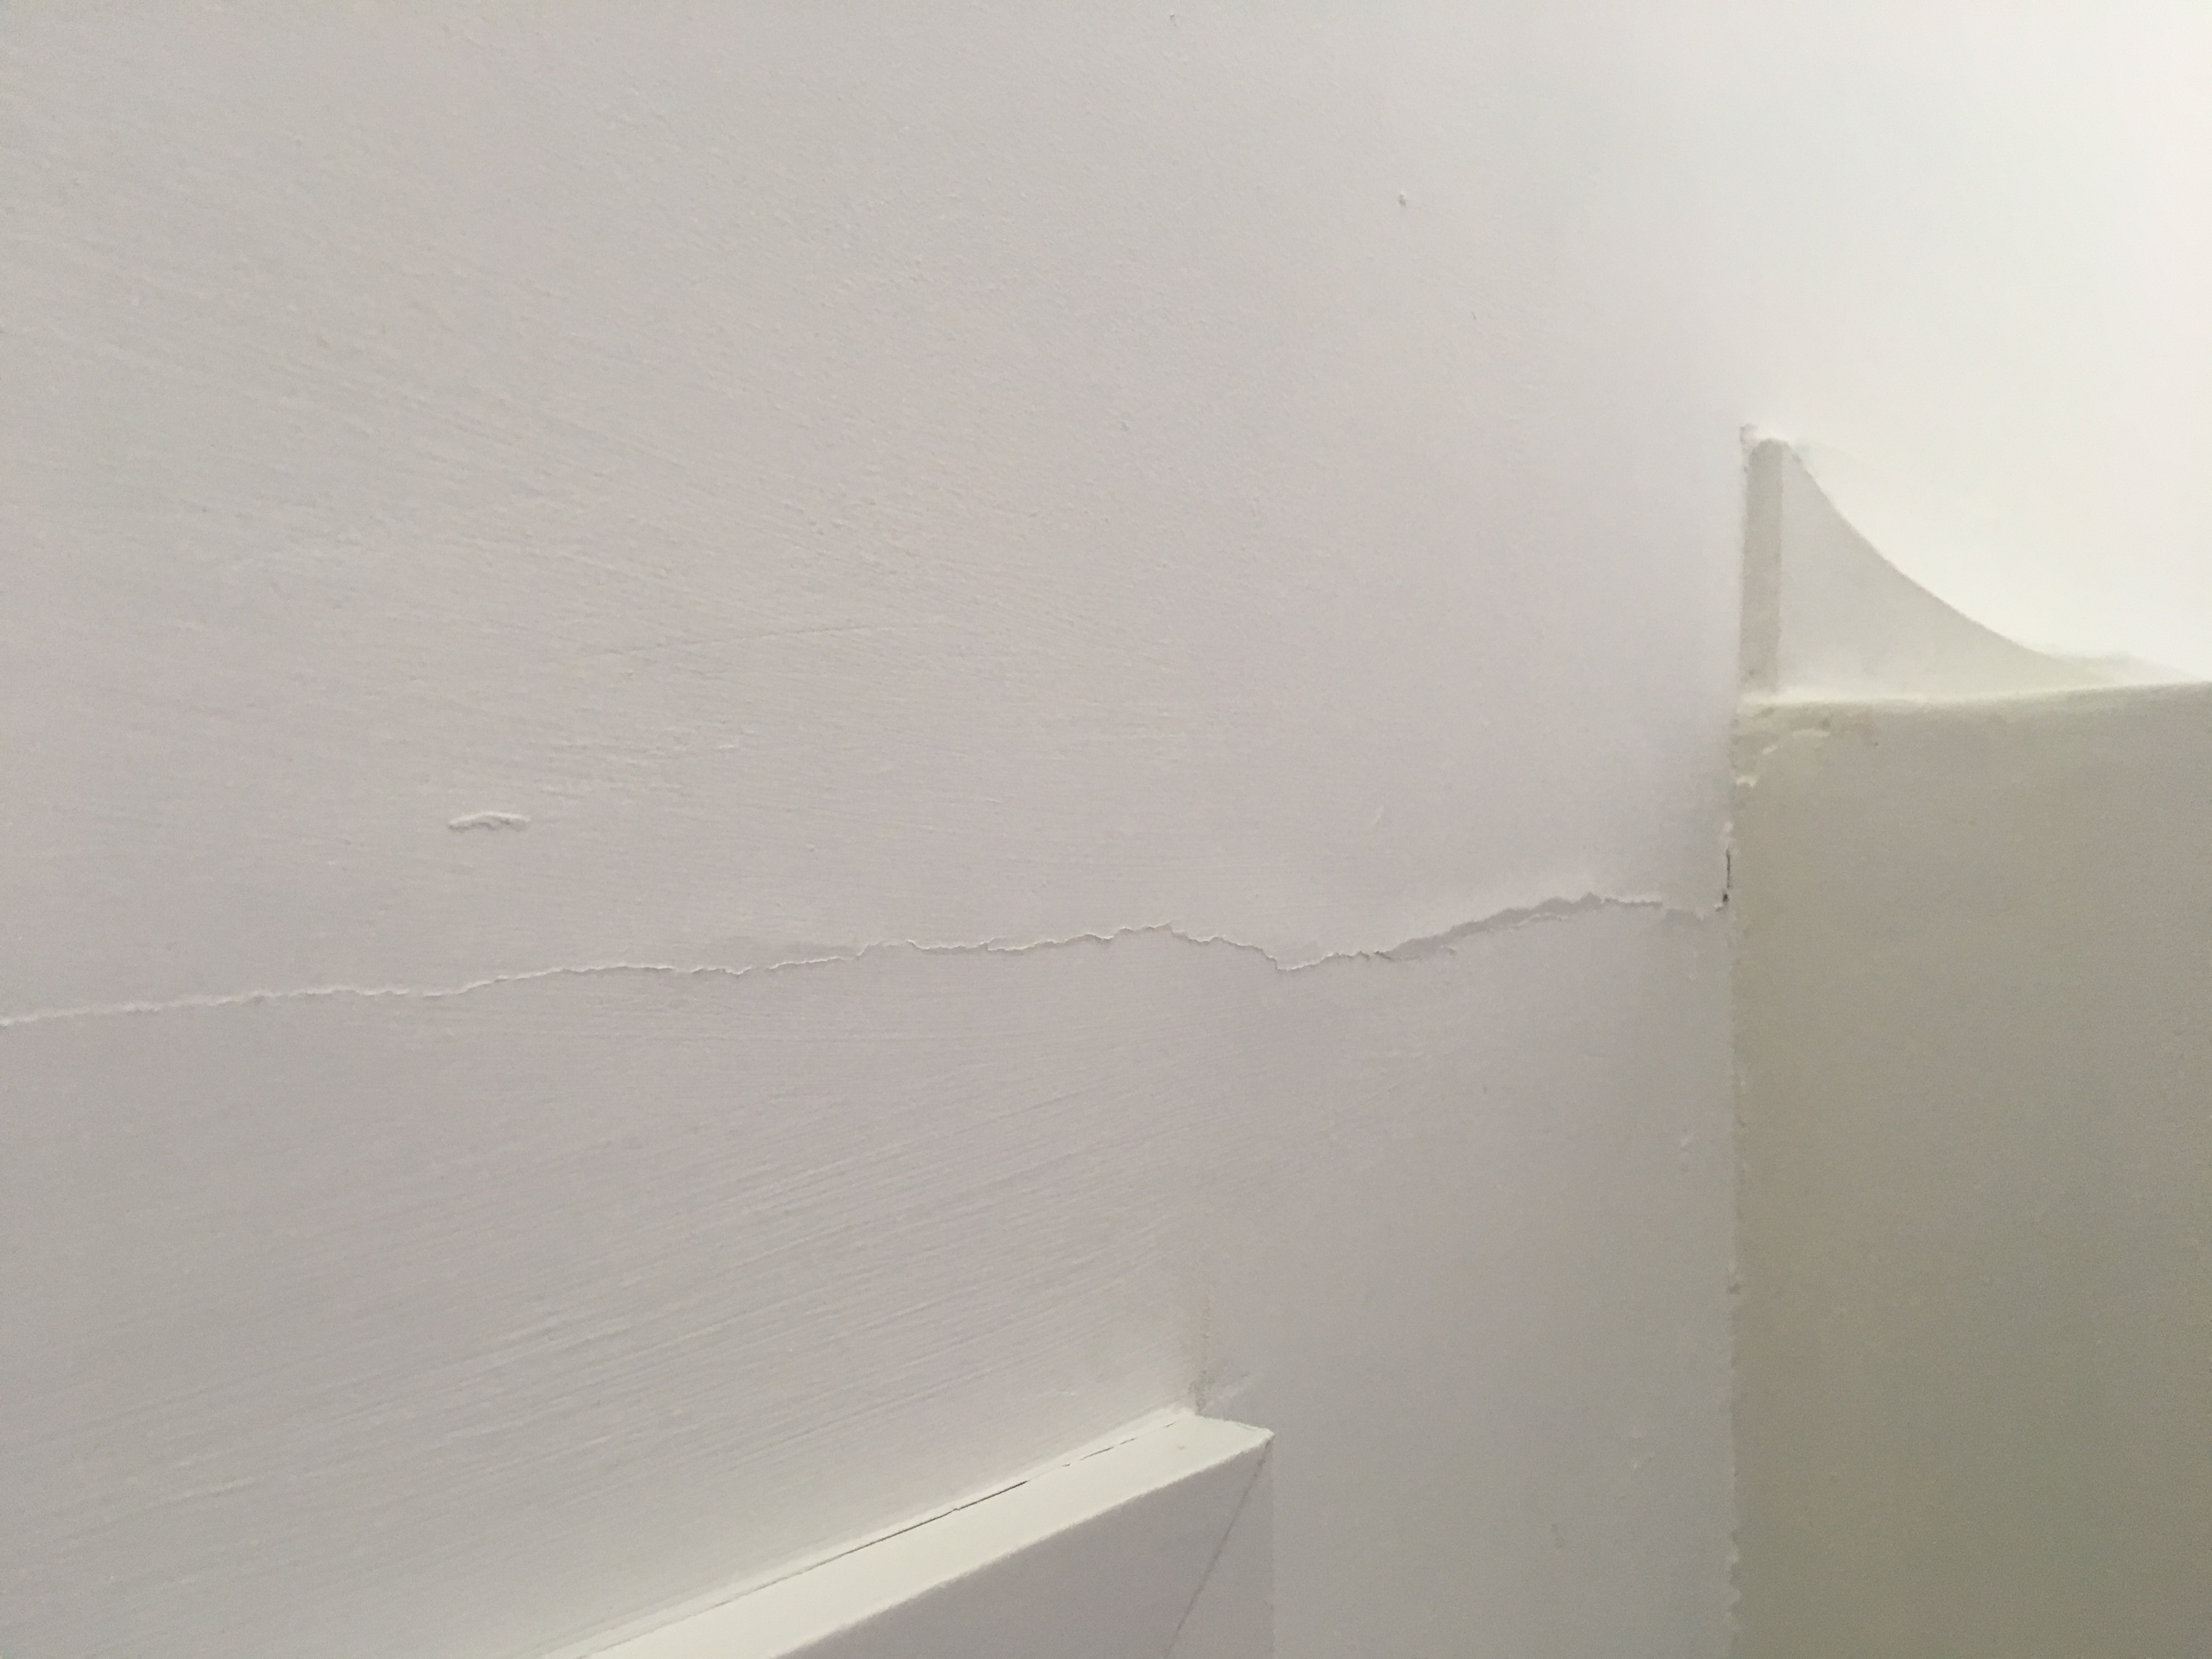 Lines of plaster coming away from ceiling